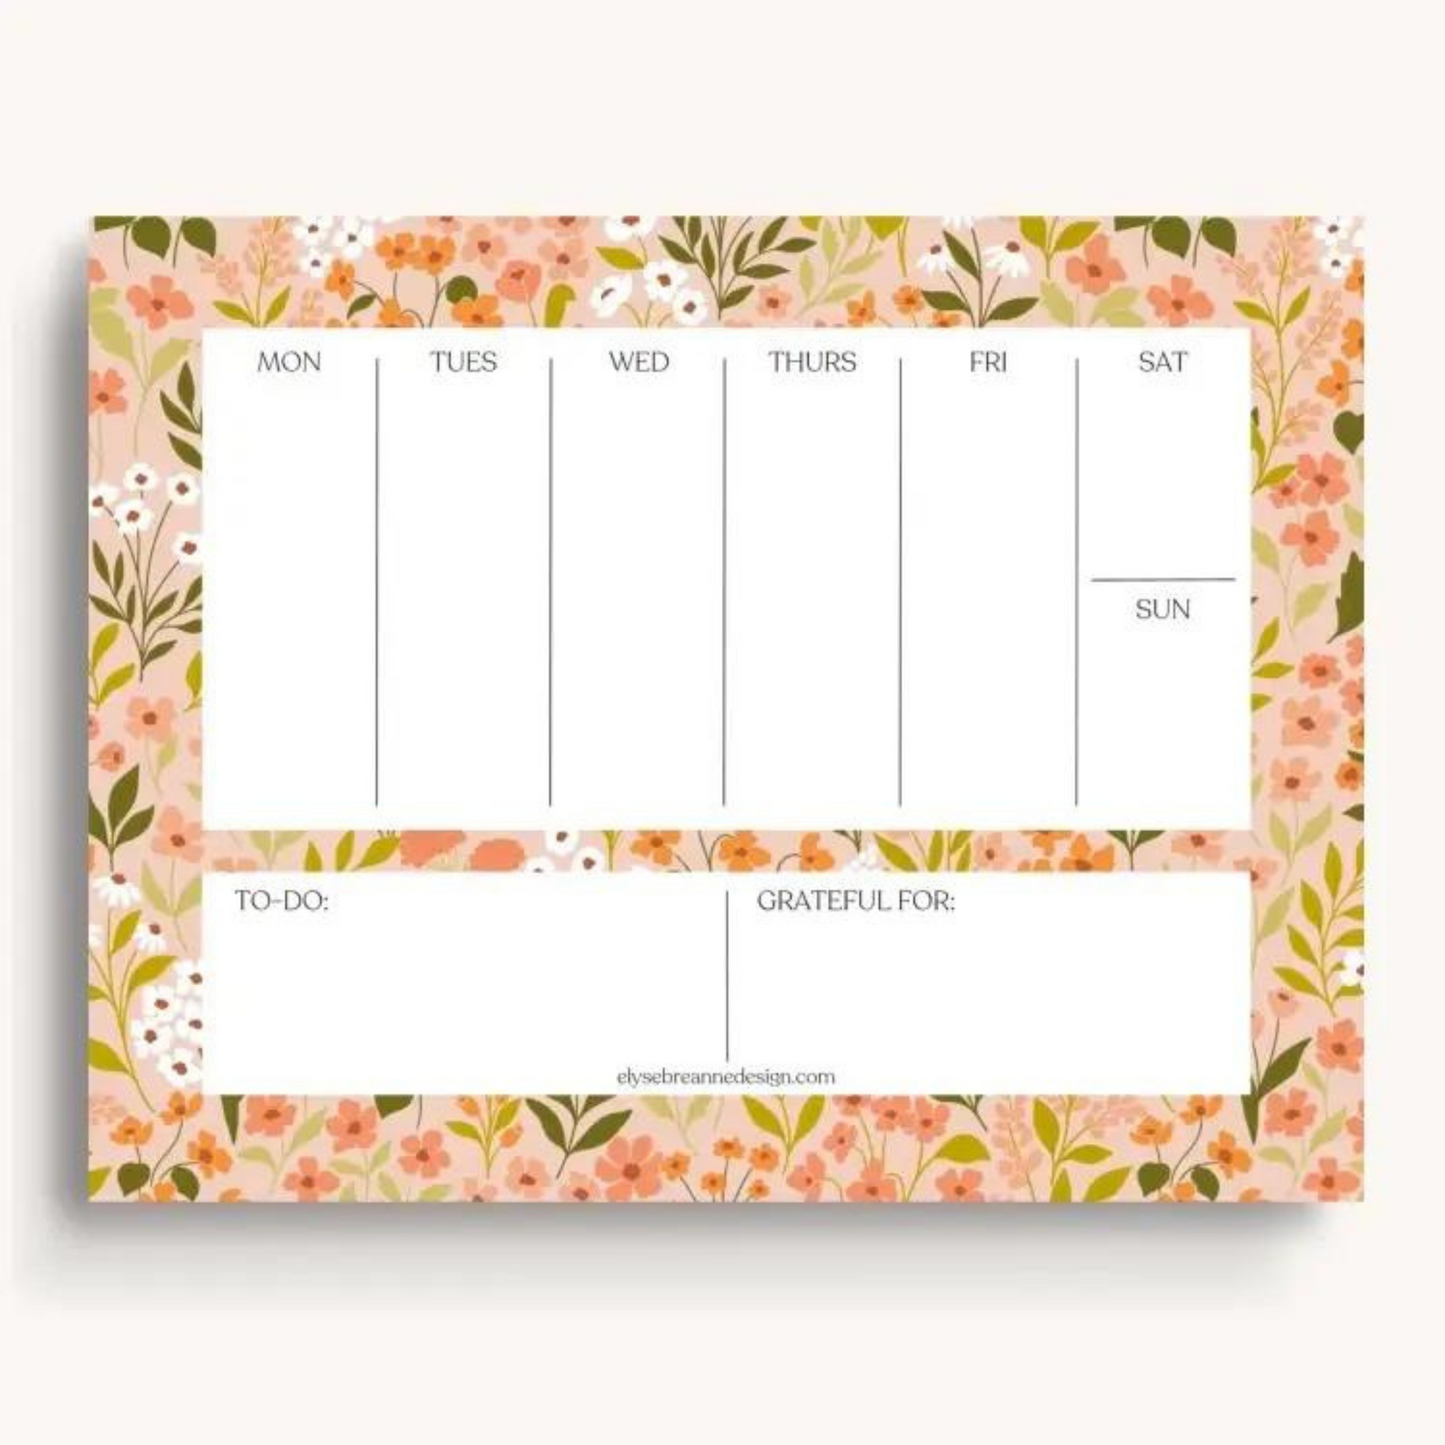 A cute weekly planner note pad, perfect for staying organized and inspired.